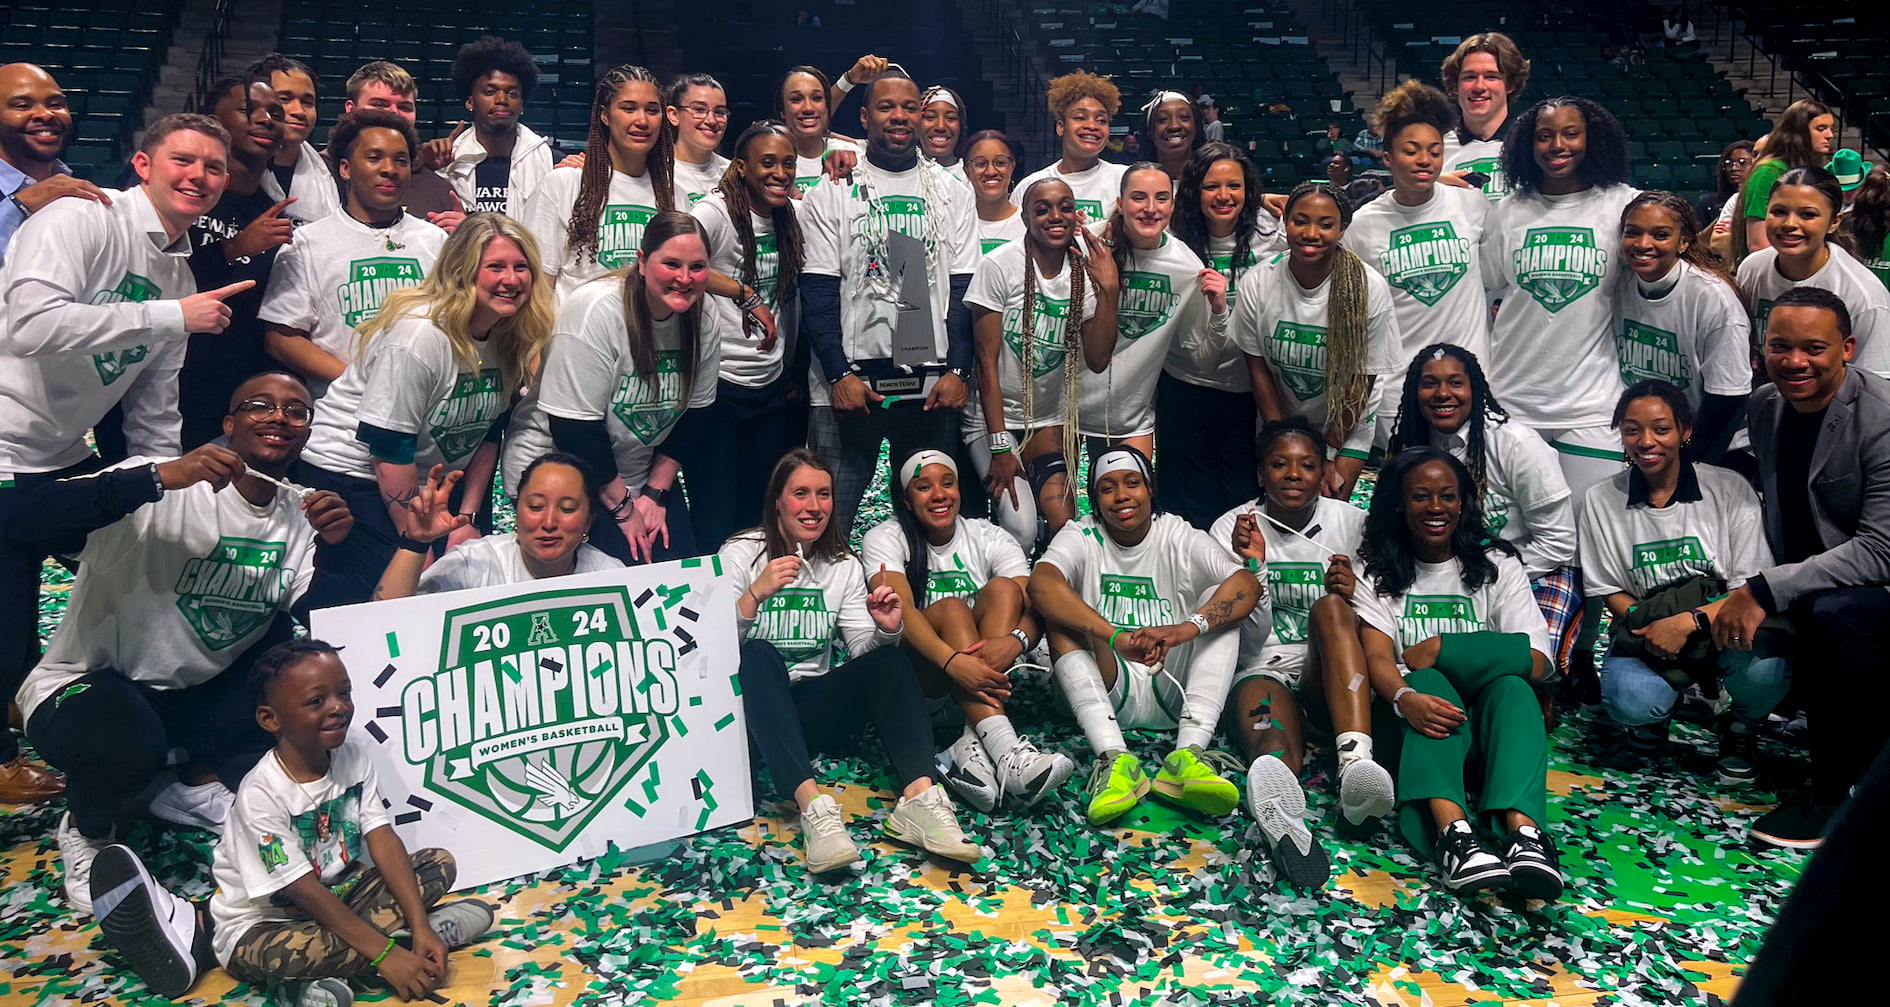 UNT Mean Green Women's Basketball team posing together on the court